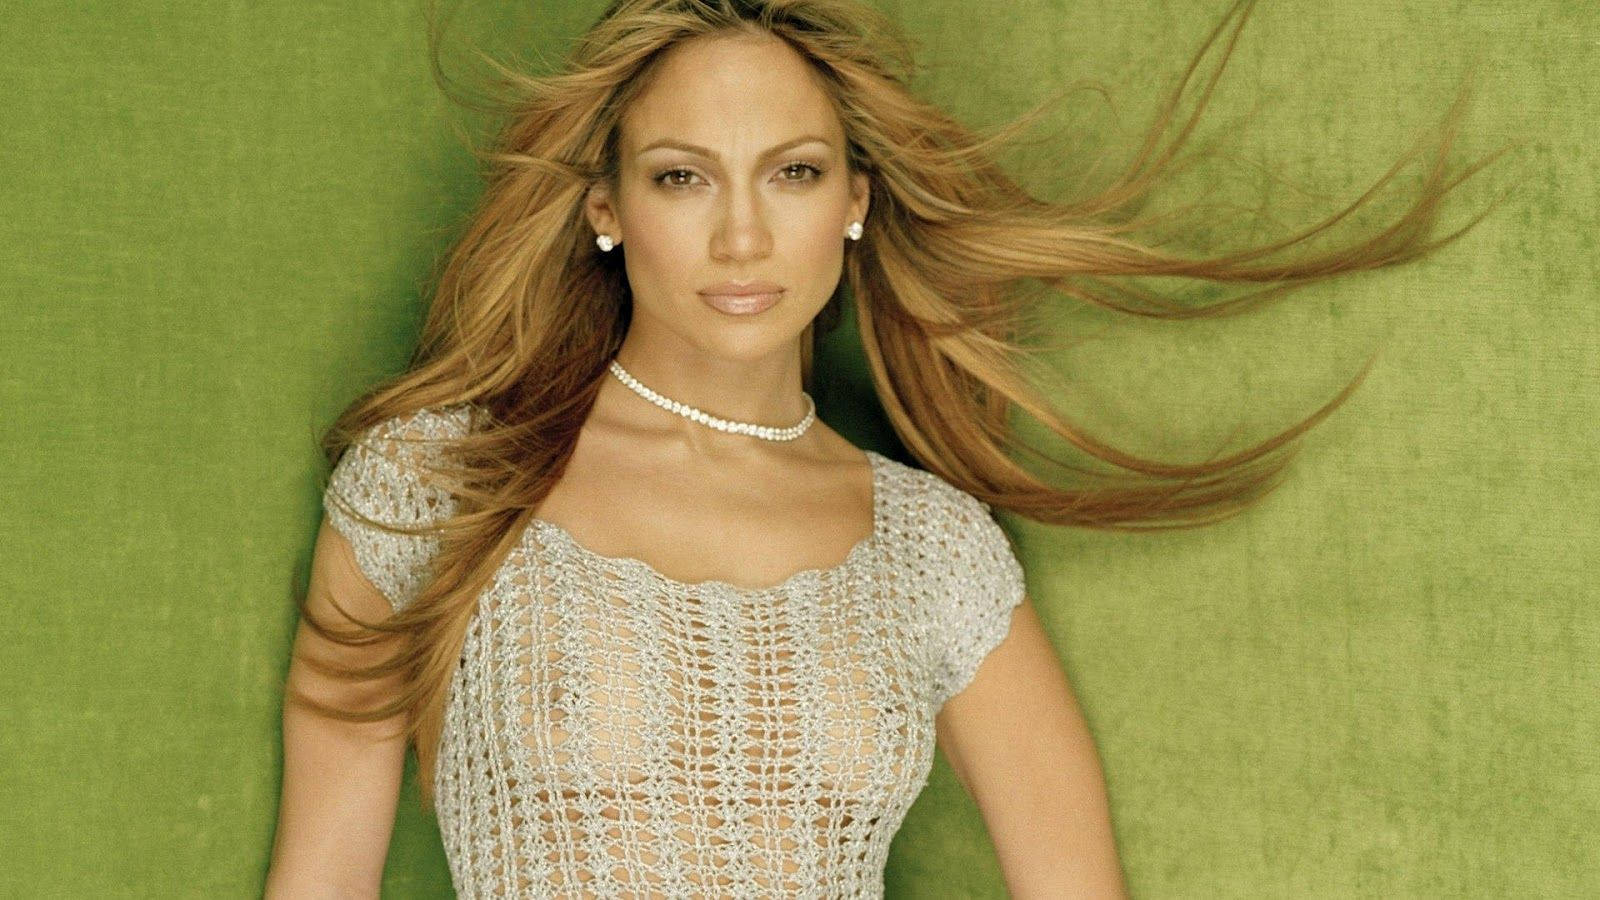 Jennifer Lopez Looking Radiant in a See-Through Top Wallpaper